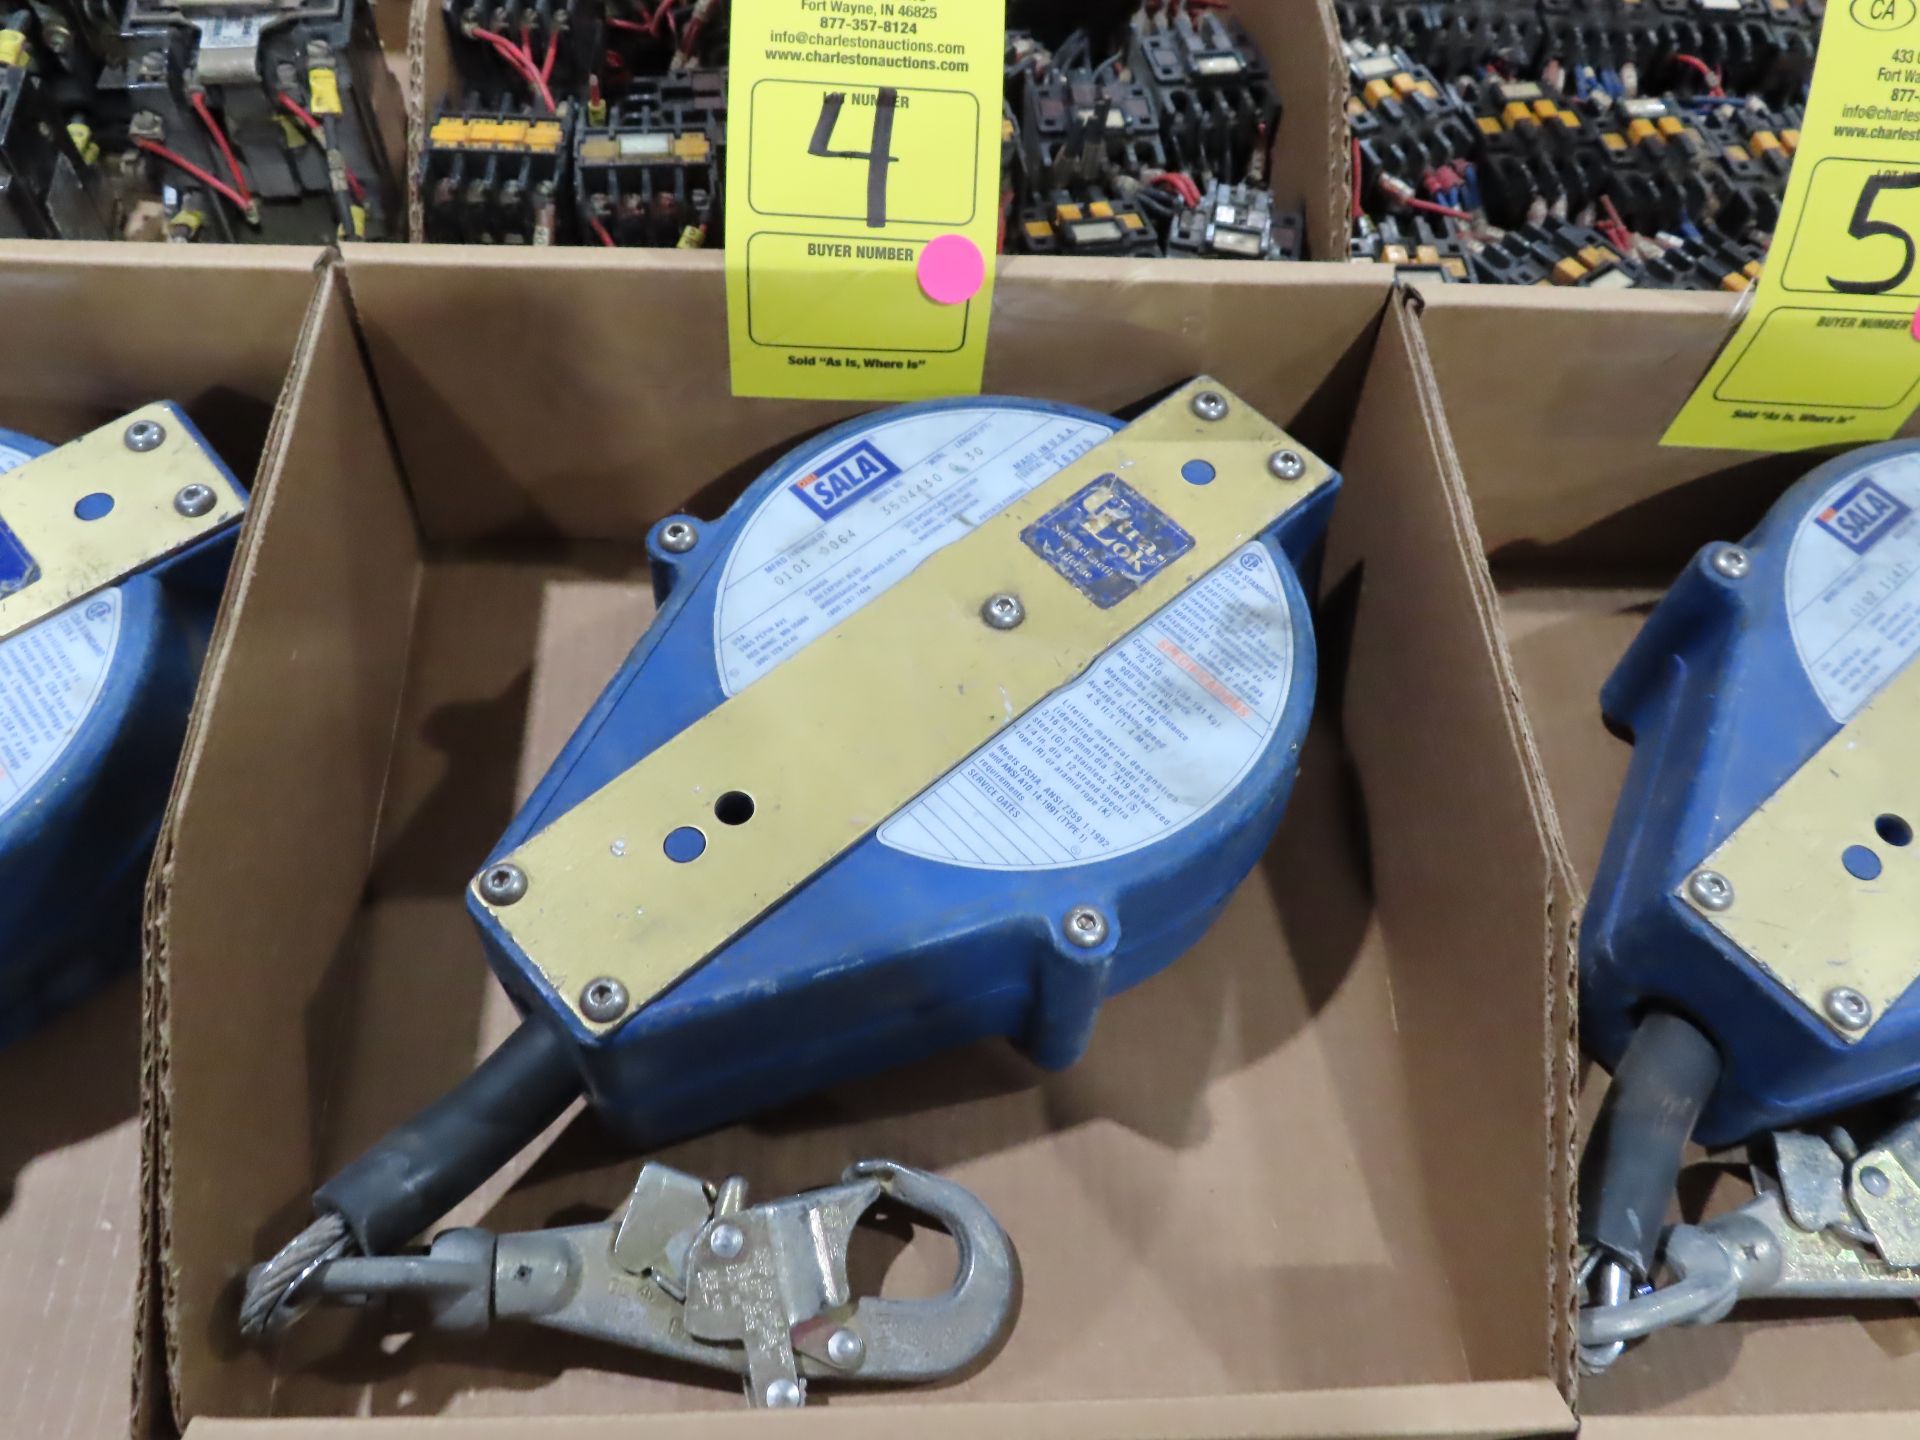 Sala model 3504430, used parts crib spare, as always with Brolyn LLC auctions, all lots can be